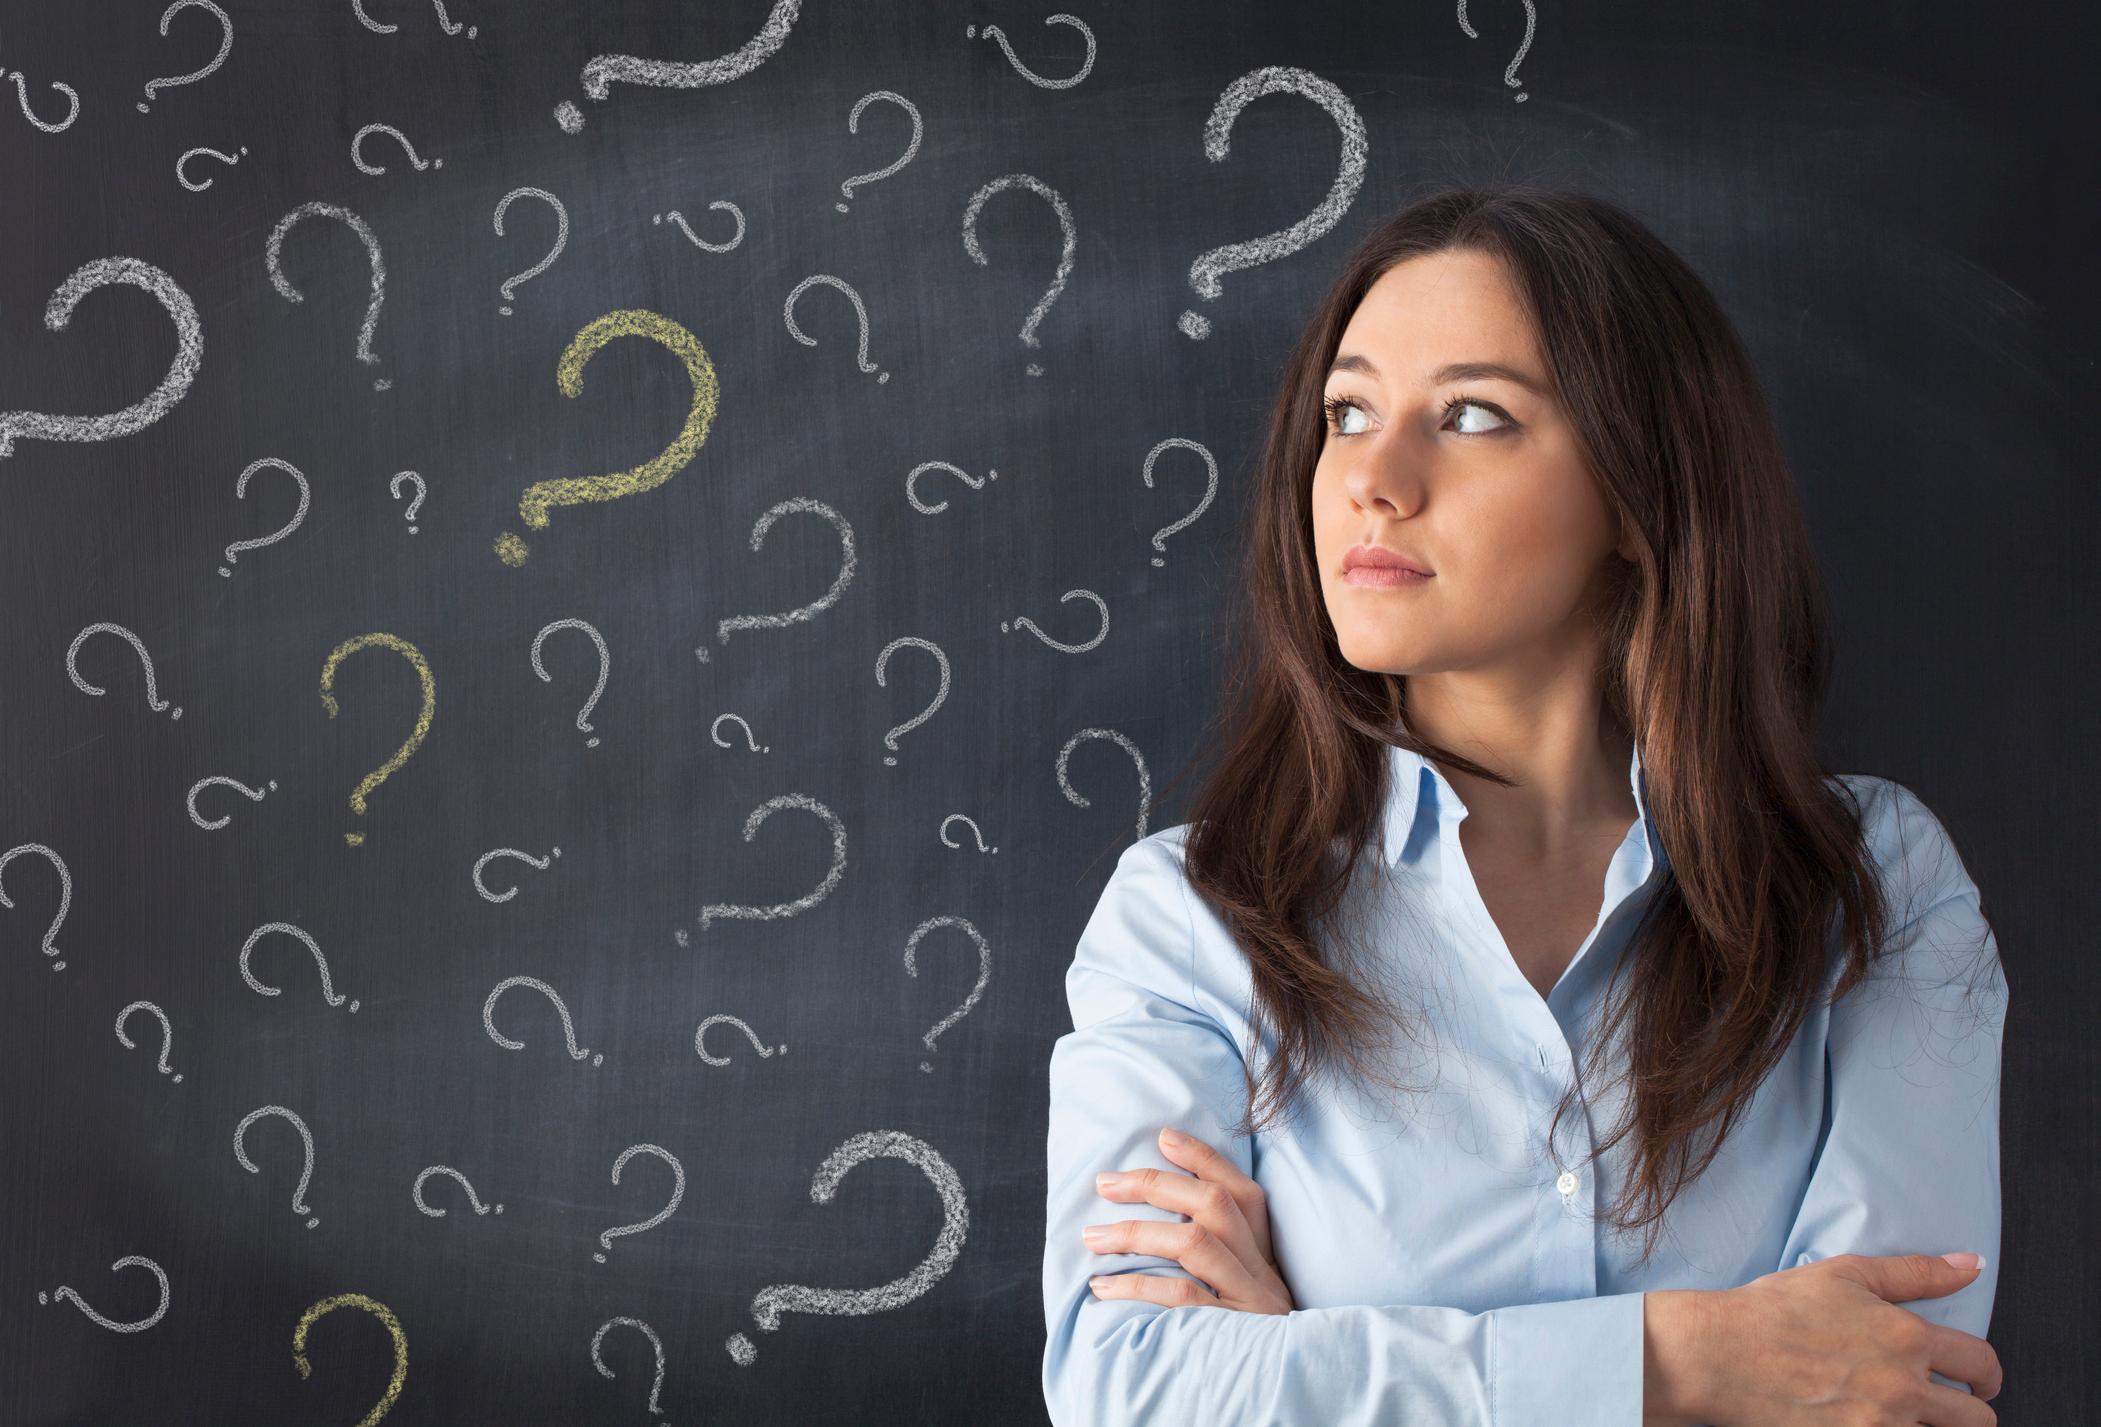 Female college student with arms crossed looking pensive, in front of chalk board with question marks on it